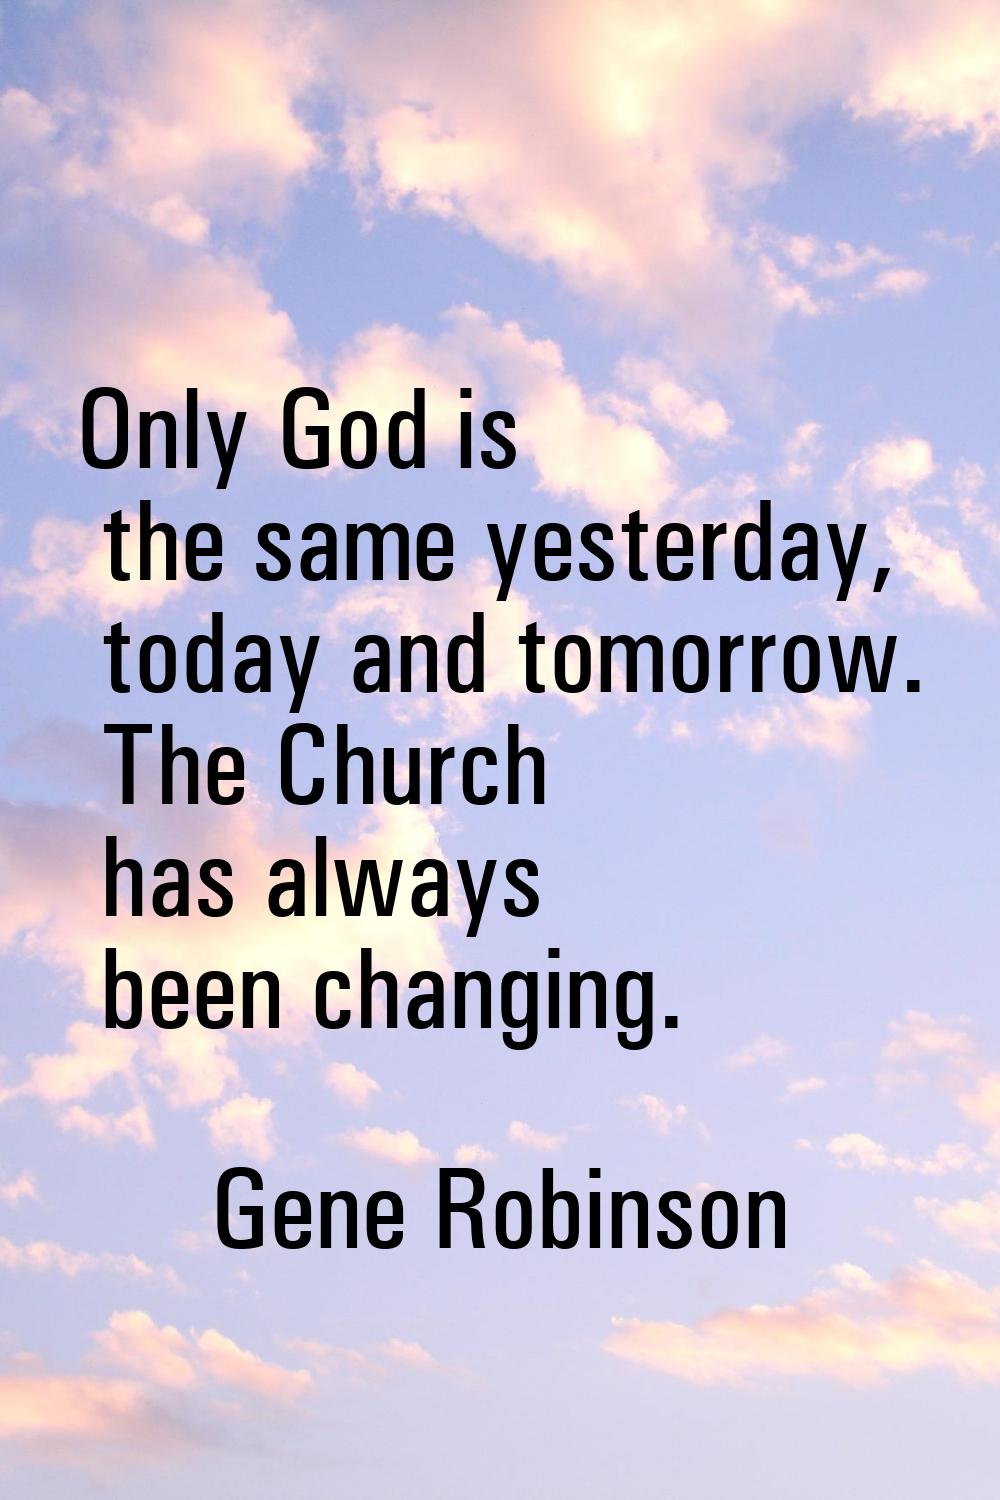 Only God is the same yesterday, today and tomorrow. The Church has always been changing.